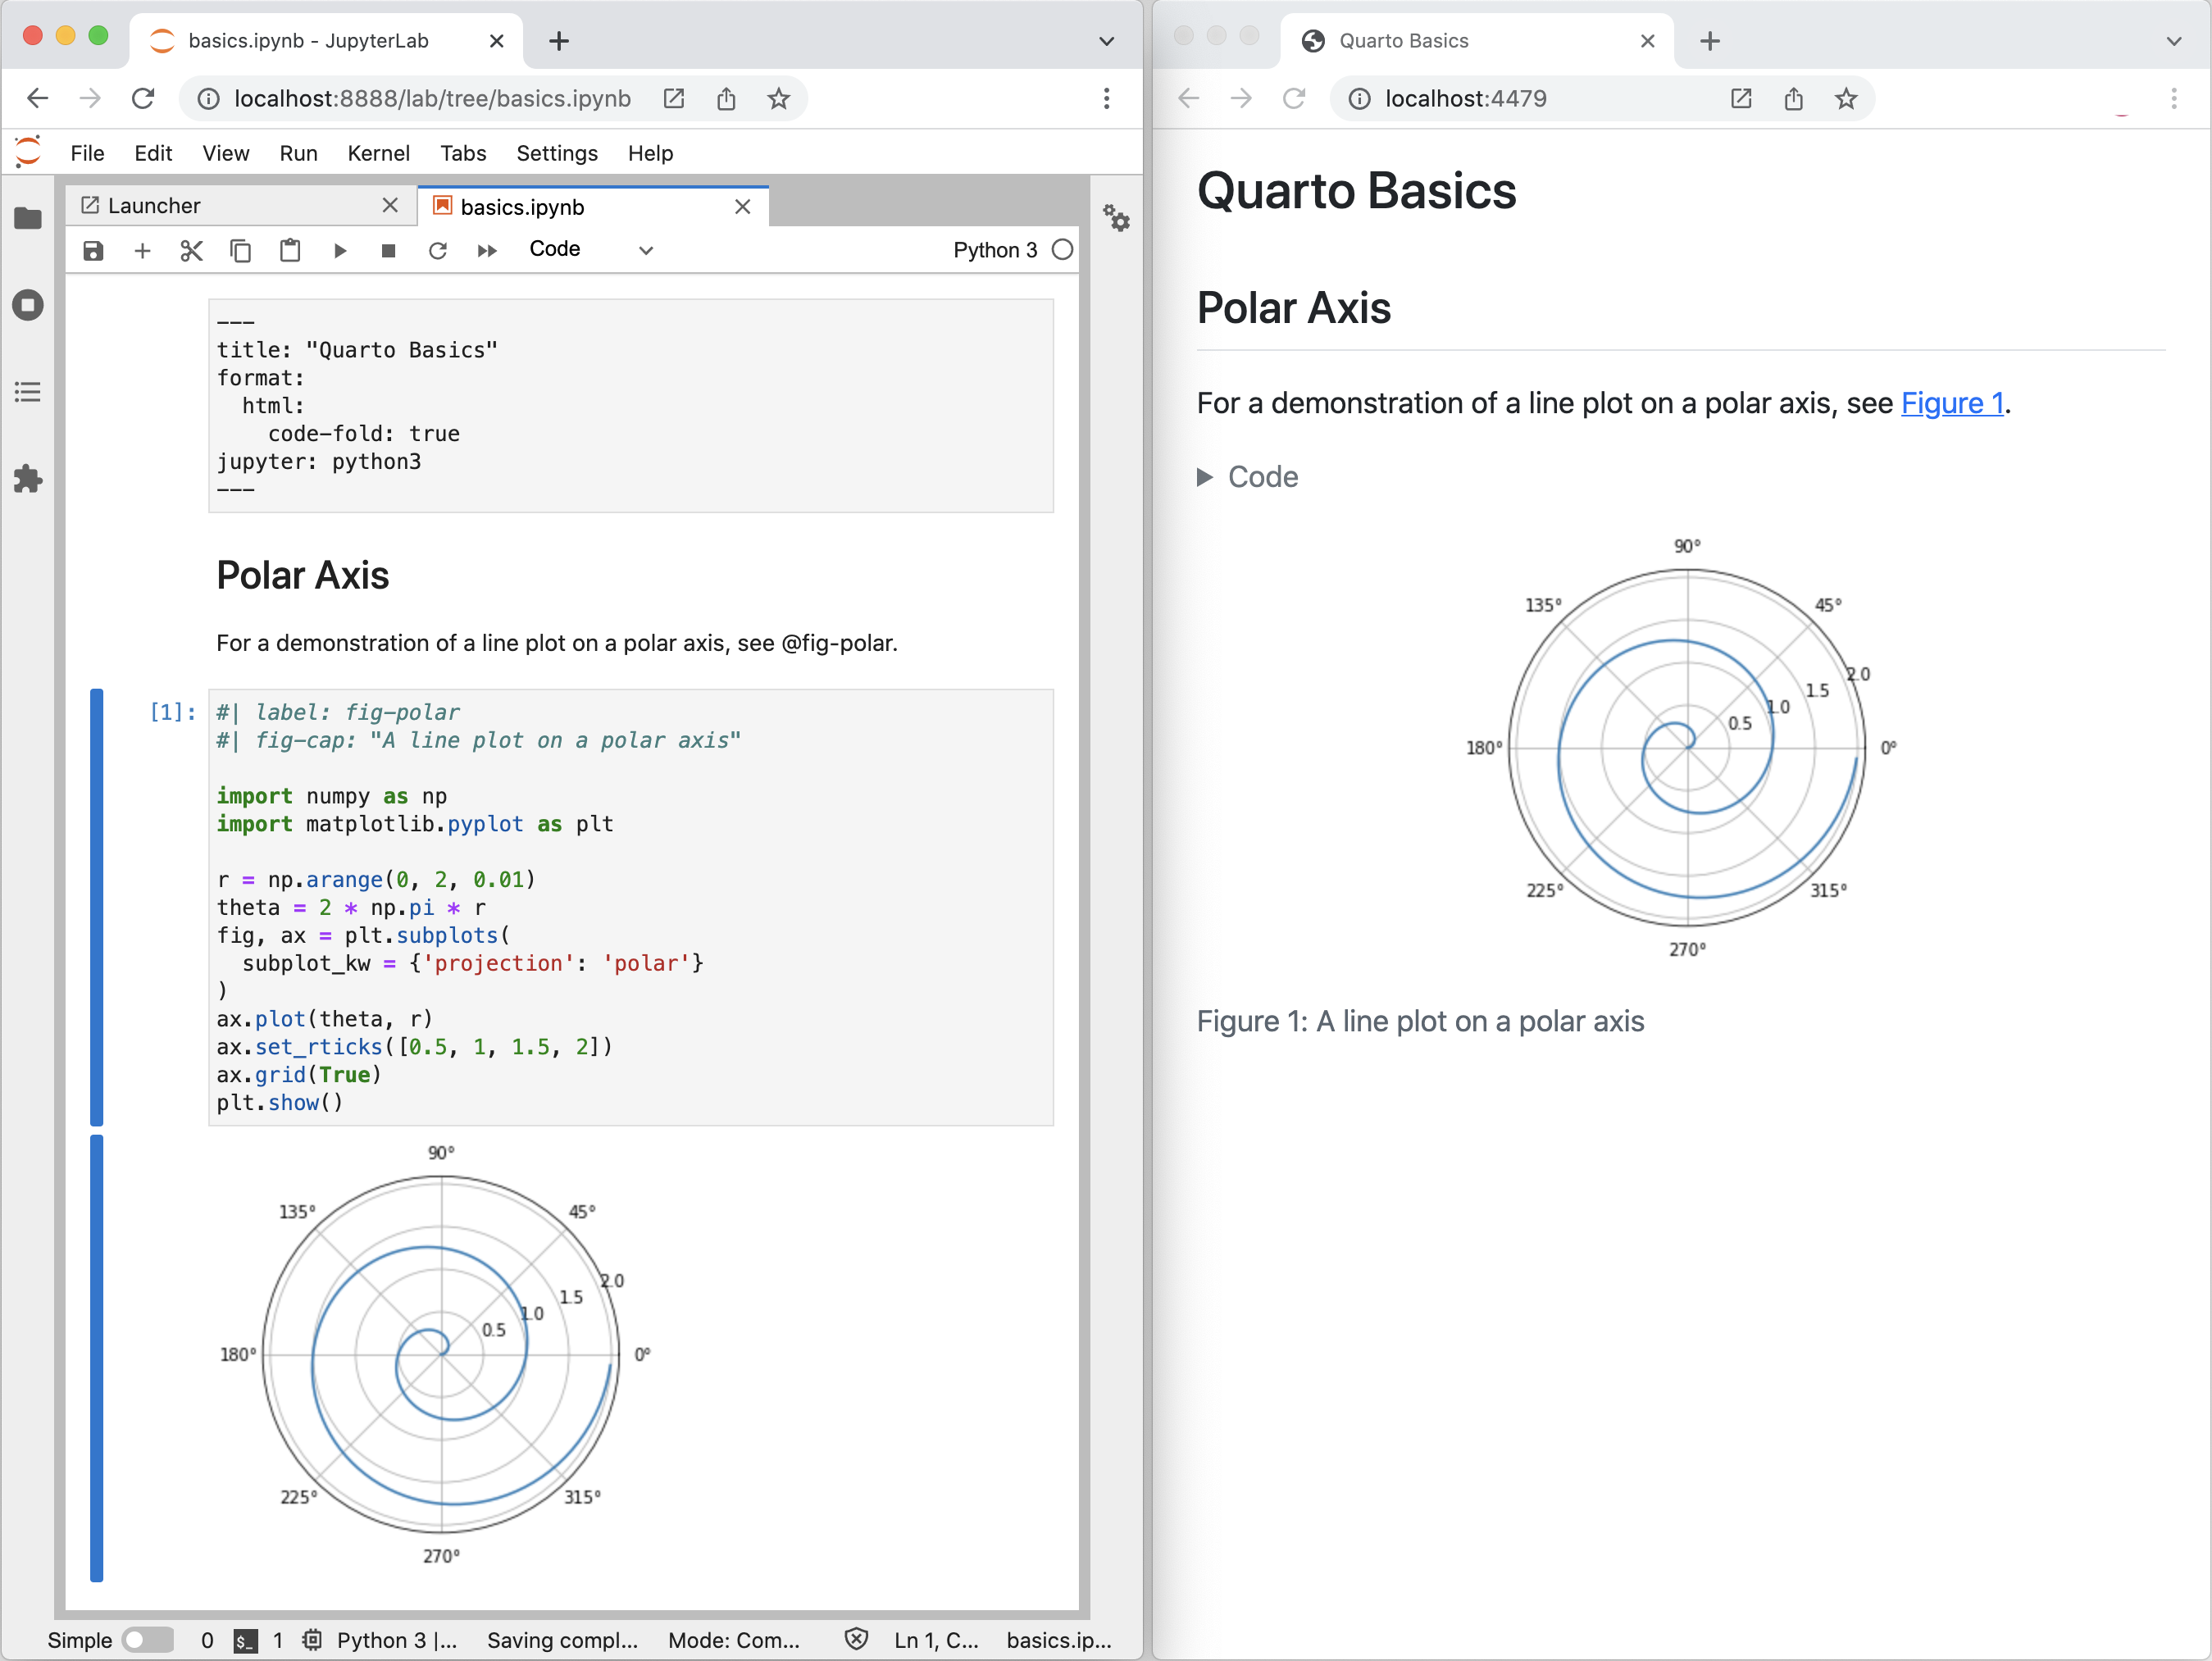 On the left: A Jupyter notebook titled Quarto Basics containing some text, a code cell, and the result of the code cell, which is a line plot on a polar axis. On the right: Rendered version of the same notebook.